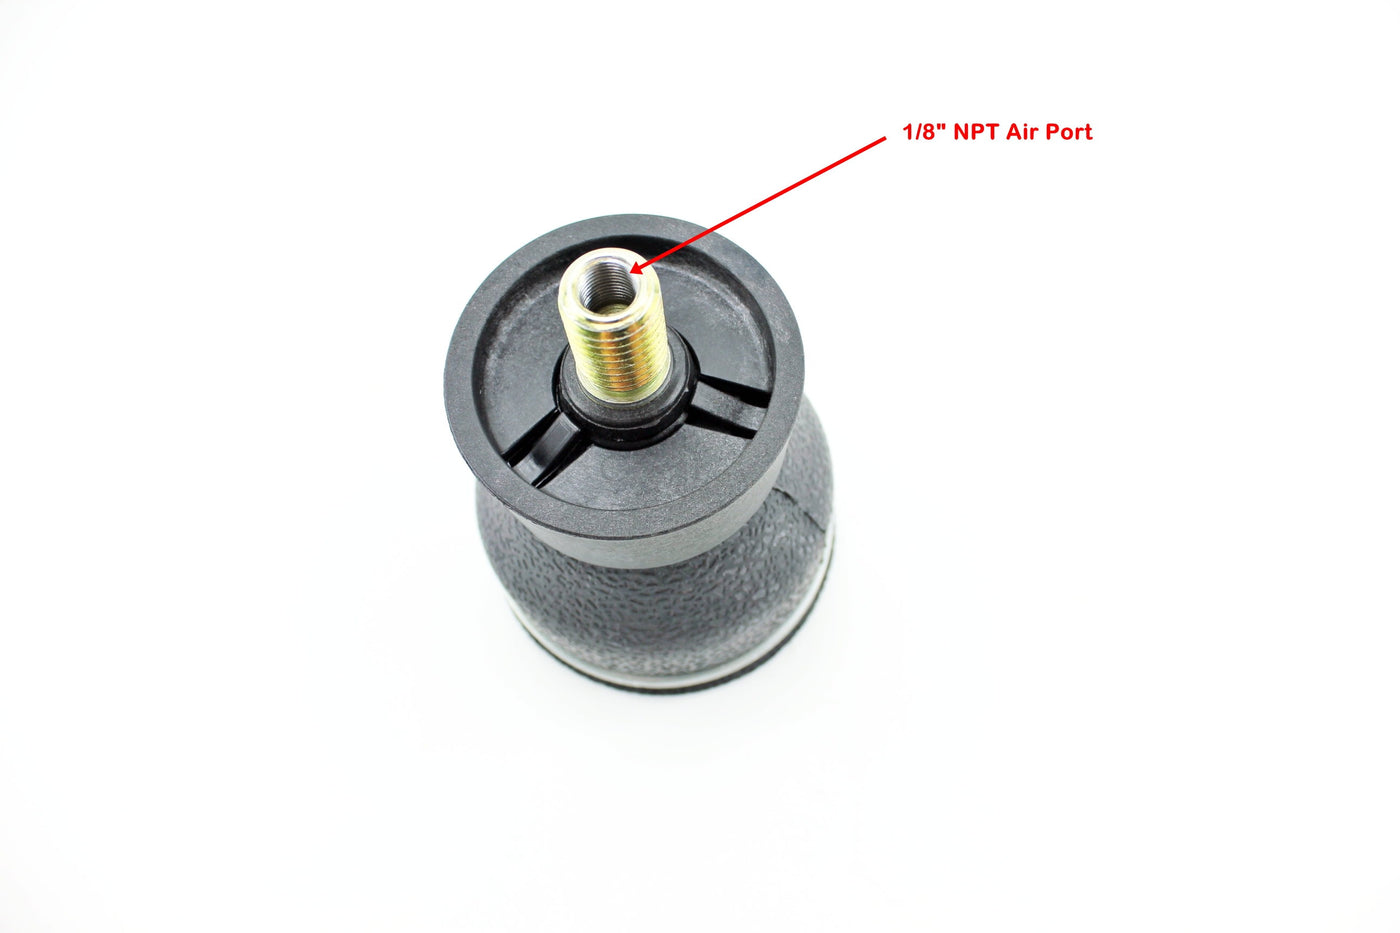 A red arrow on a black TC Bros. plug indicates adjustability for the TC Bros. Choppers Air Spring.